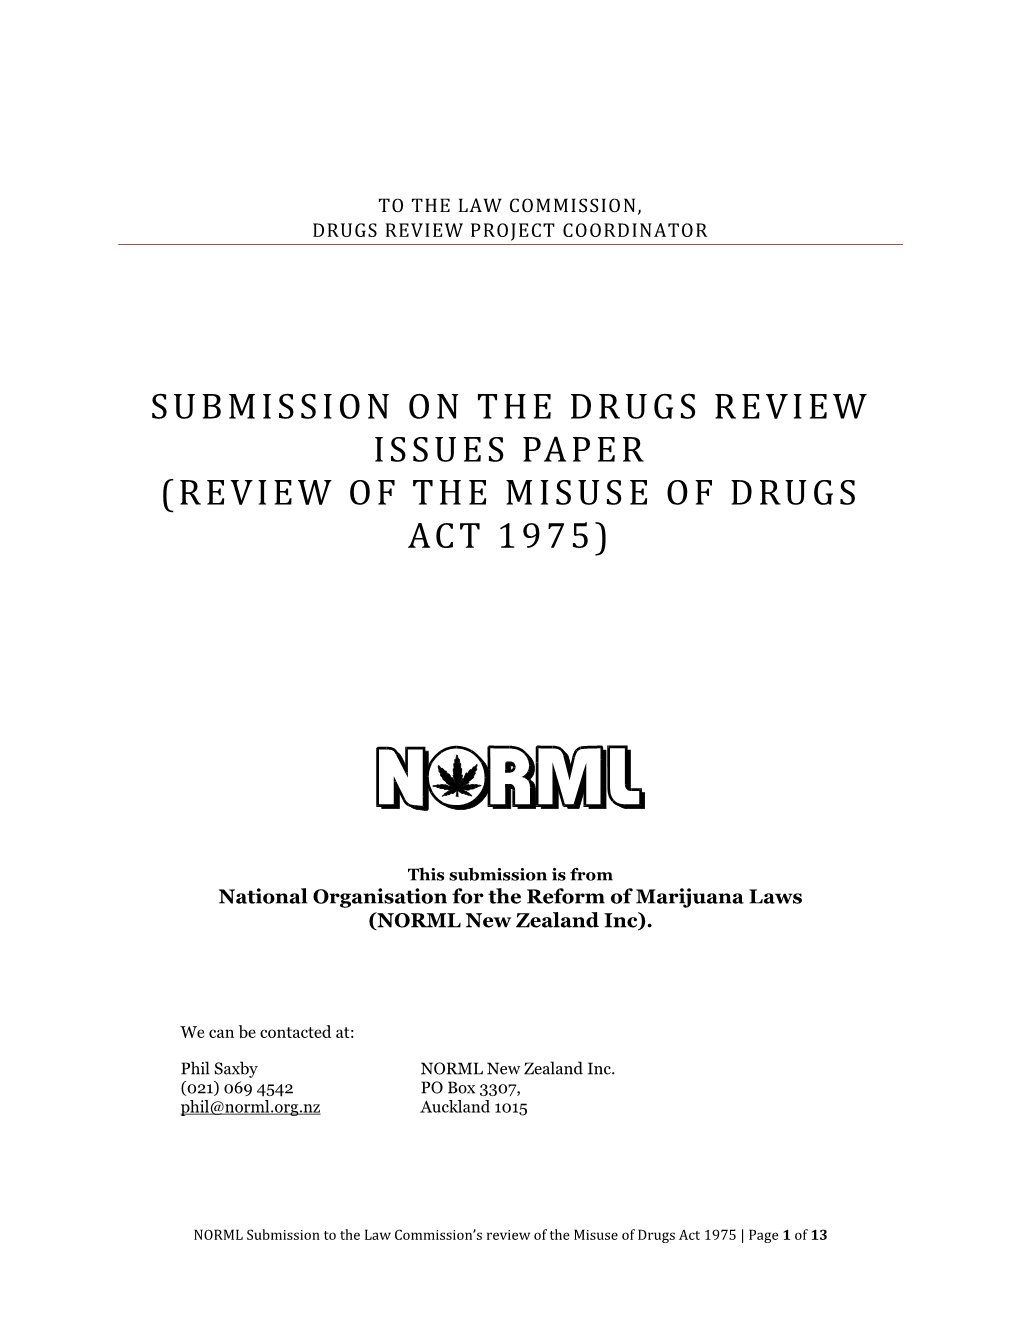 Law Commission's Review of the Misuse of Drugs